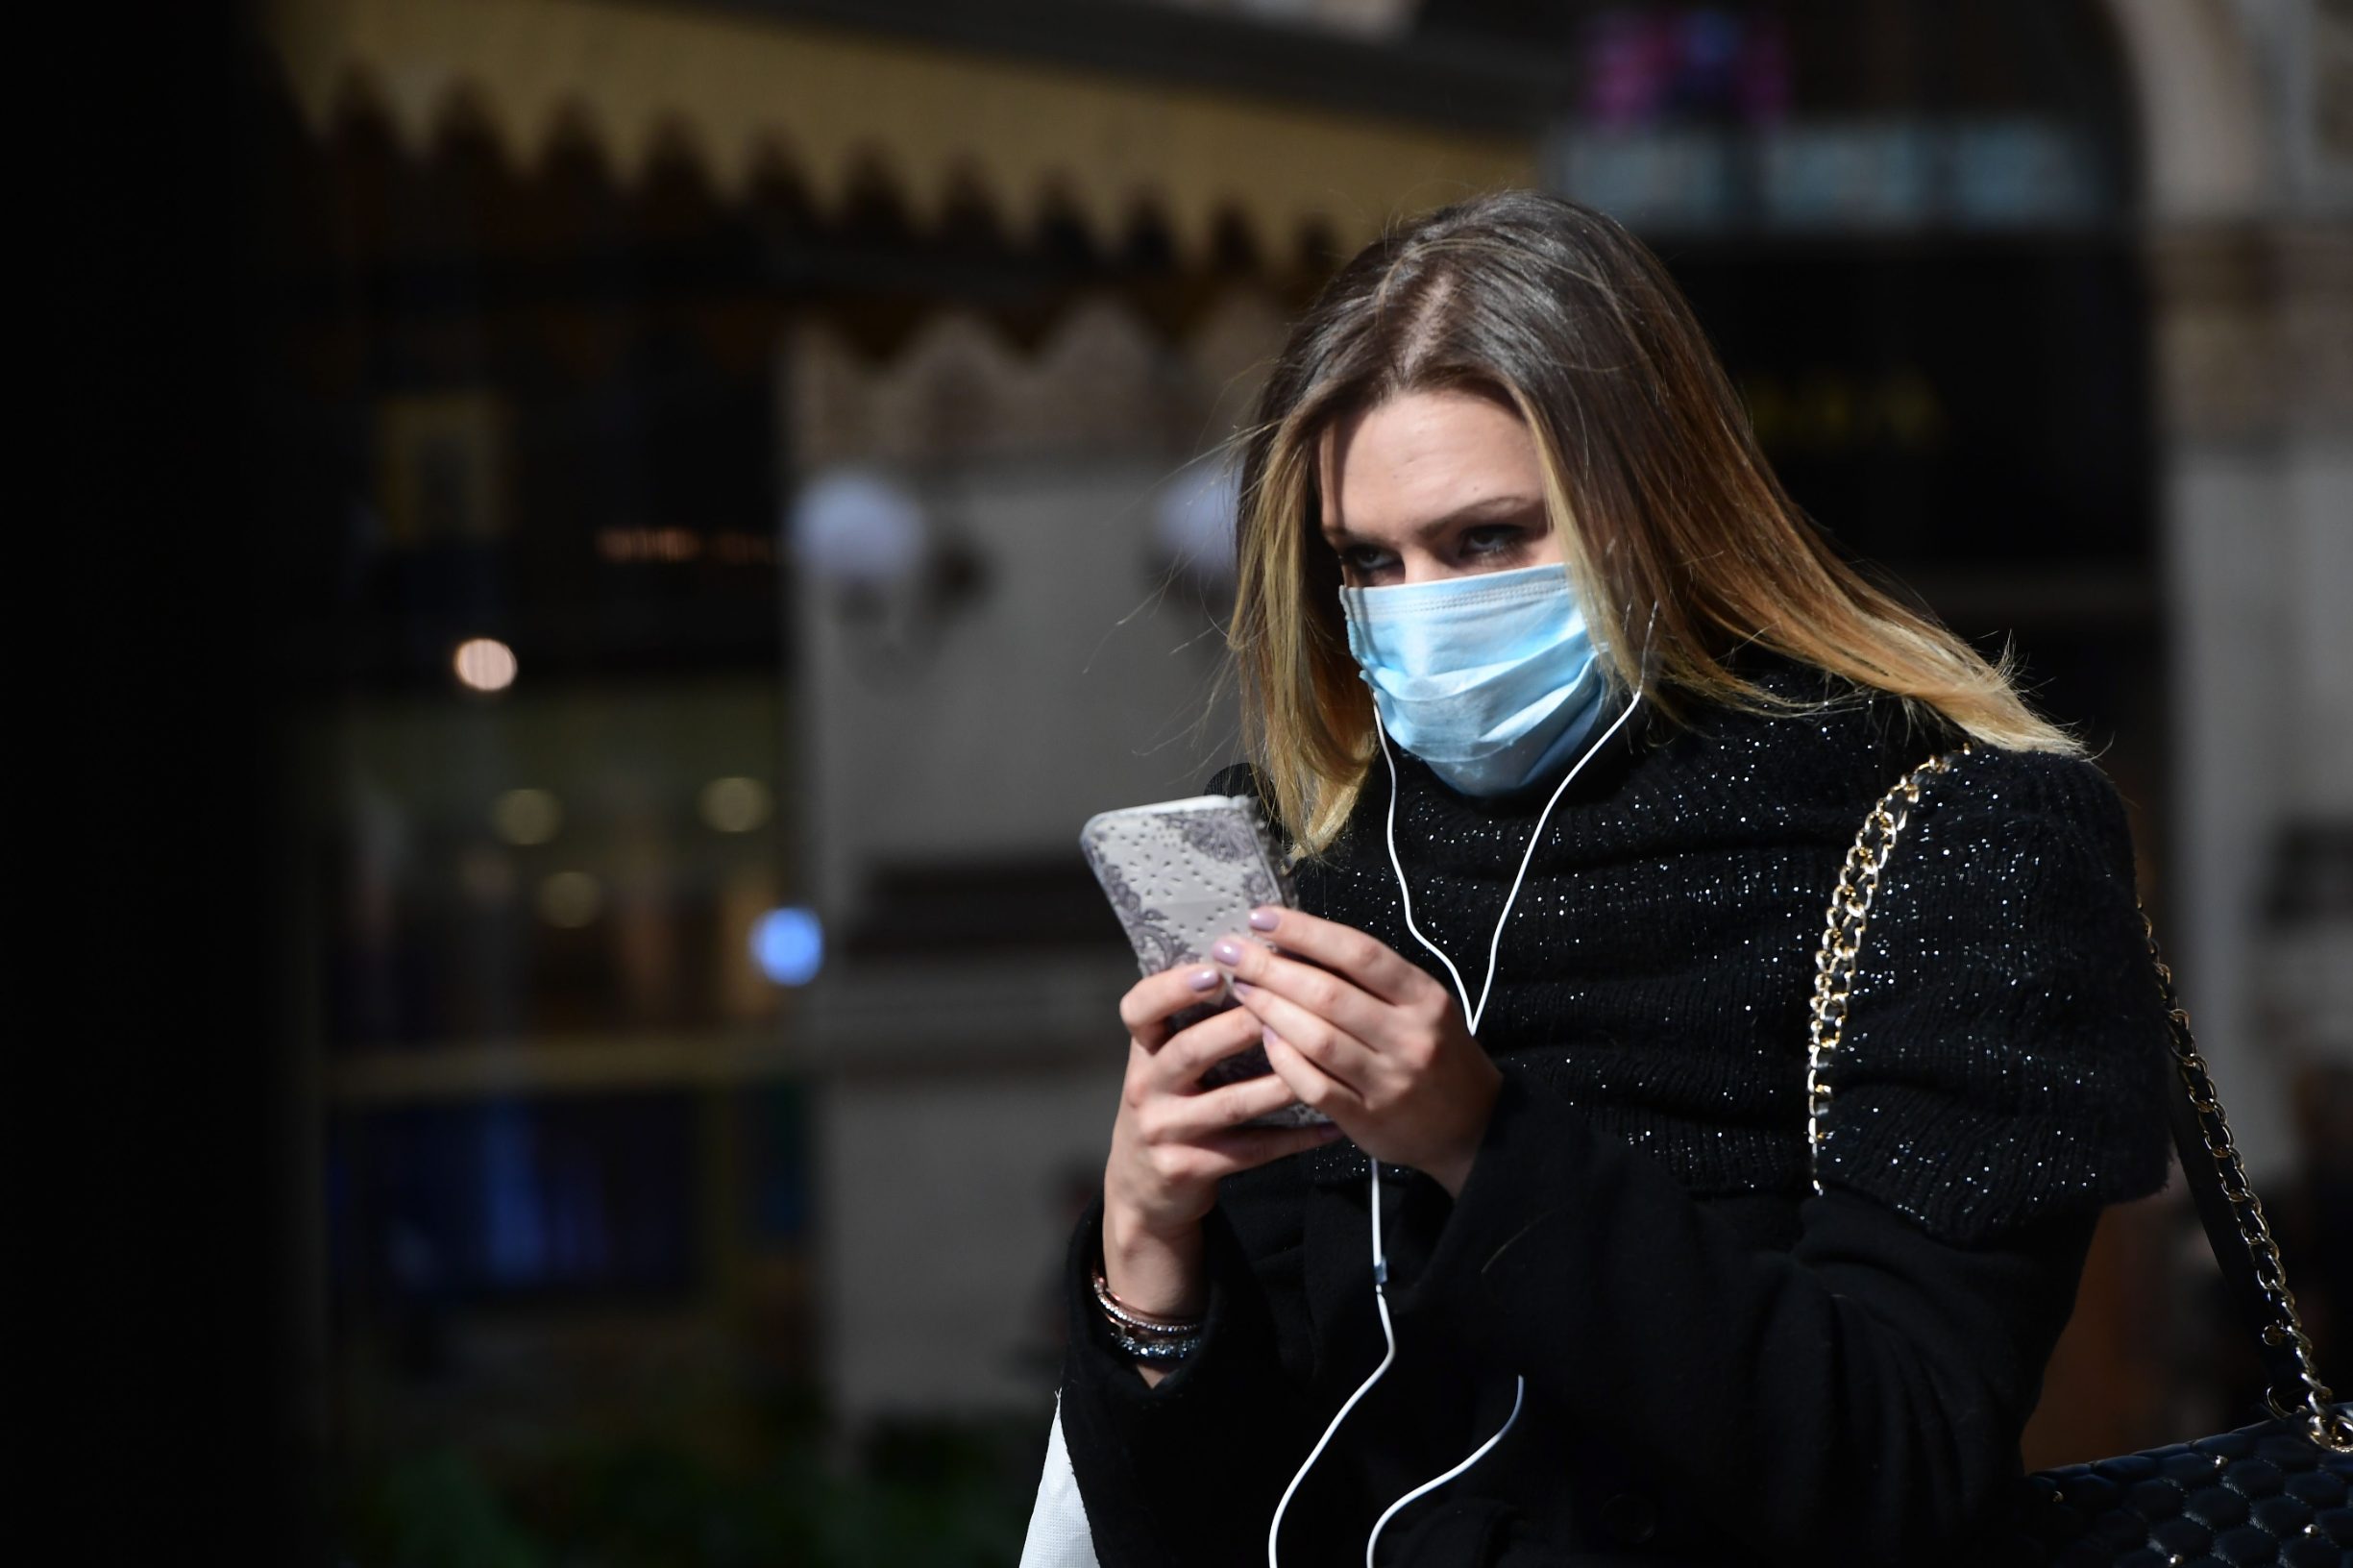 A woman wearing a protective mask walk in Galleria Vittorio Emanuele II in center Milan on February 28, 2020. - Italy urged tourists spooked by the novel coronavirus COVID-19 not to stay away, but efforts to reassure the world it was managing the outbreak were overshadowed by confusion over case numbers. (Photo by Miguel MEDINA / AFP)